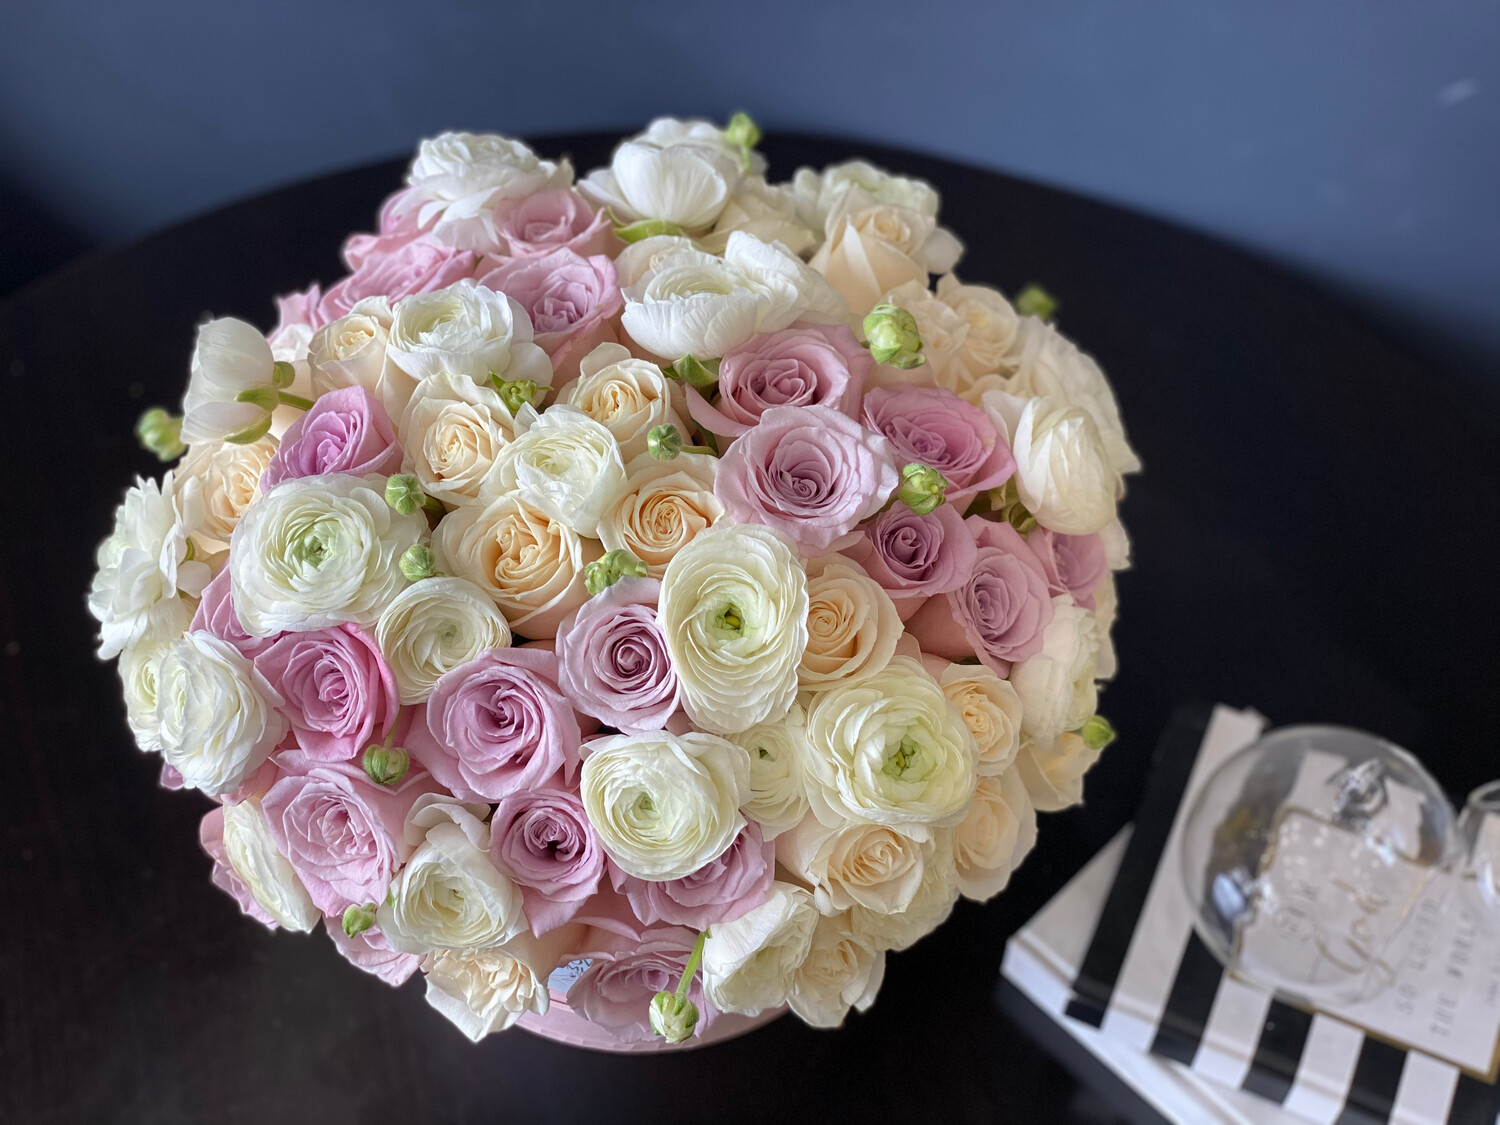 Boxed Design with roses and ranunculus